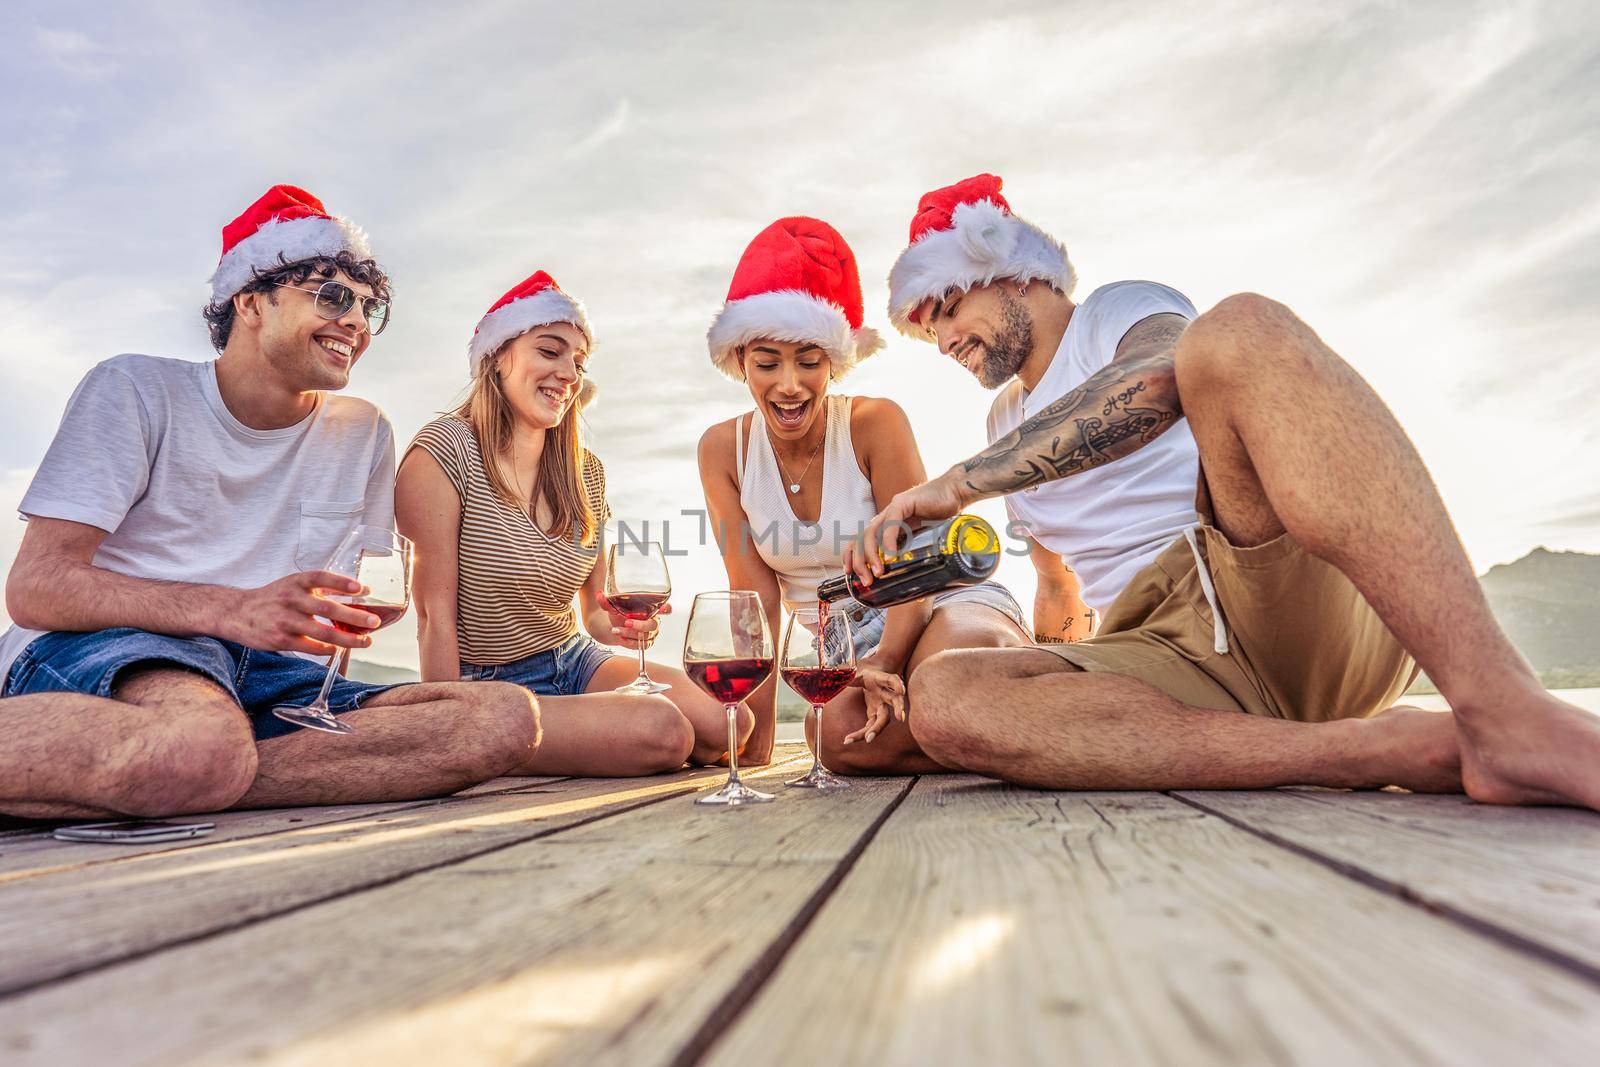 Happy people enjoying outdoor life in exotic vacation resort drinking alcohol. Group of young friends having fun together at sunset wearing red Santa Claus hat sitting on a pier in sea vacation resort by robbyfontanesi